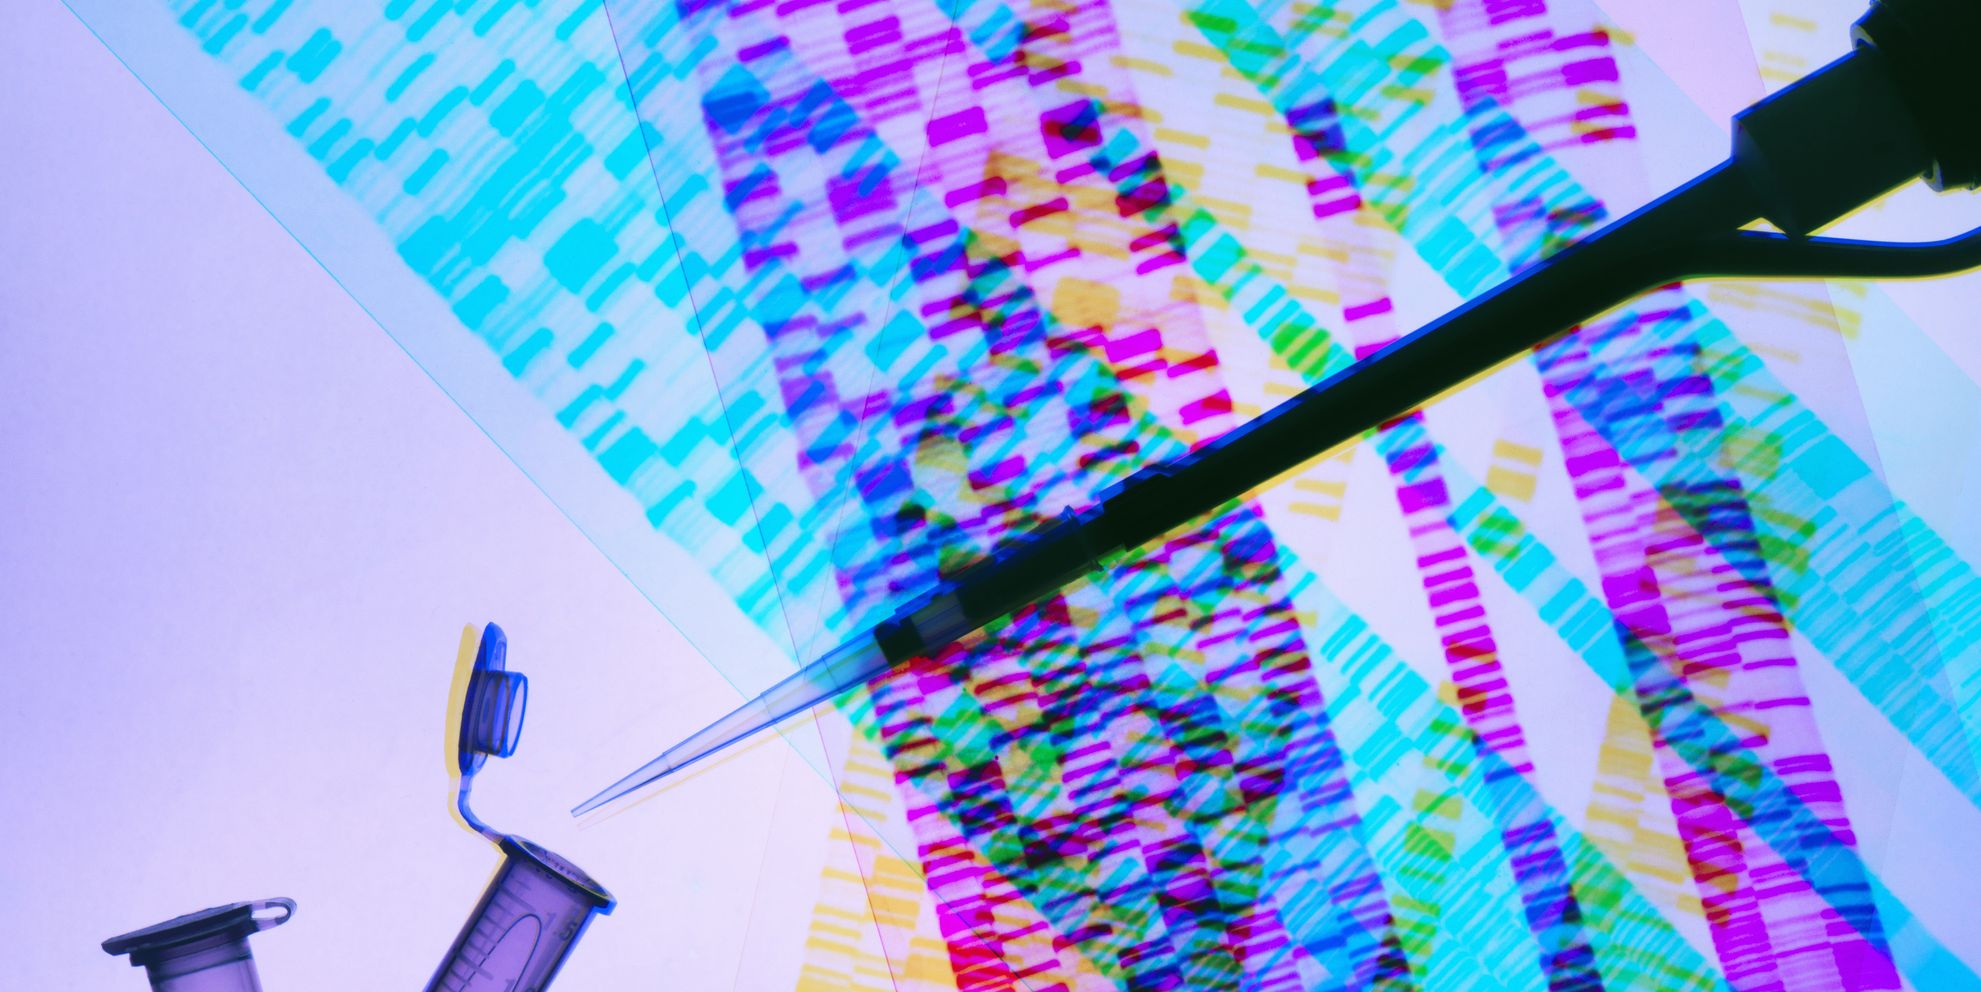 Genetic research, pipette and DNA samples on DNA autoradiogram illustrating research into life sciences and genetic modification